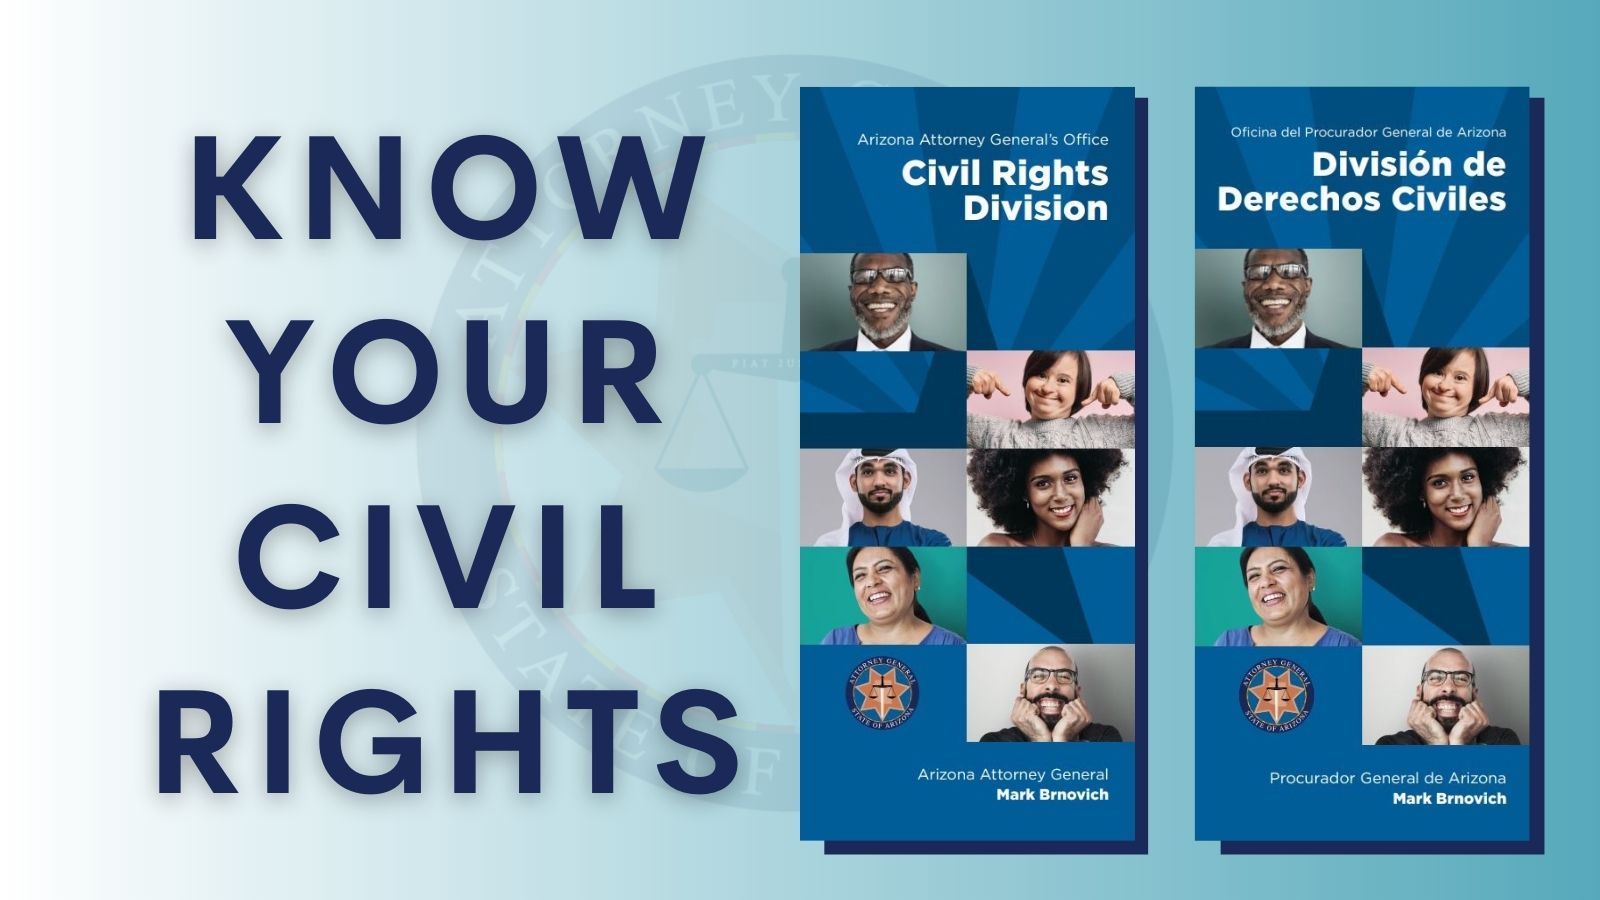 Banner reading "Know Your Civil Rights"